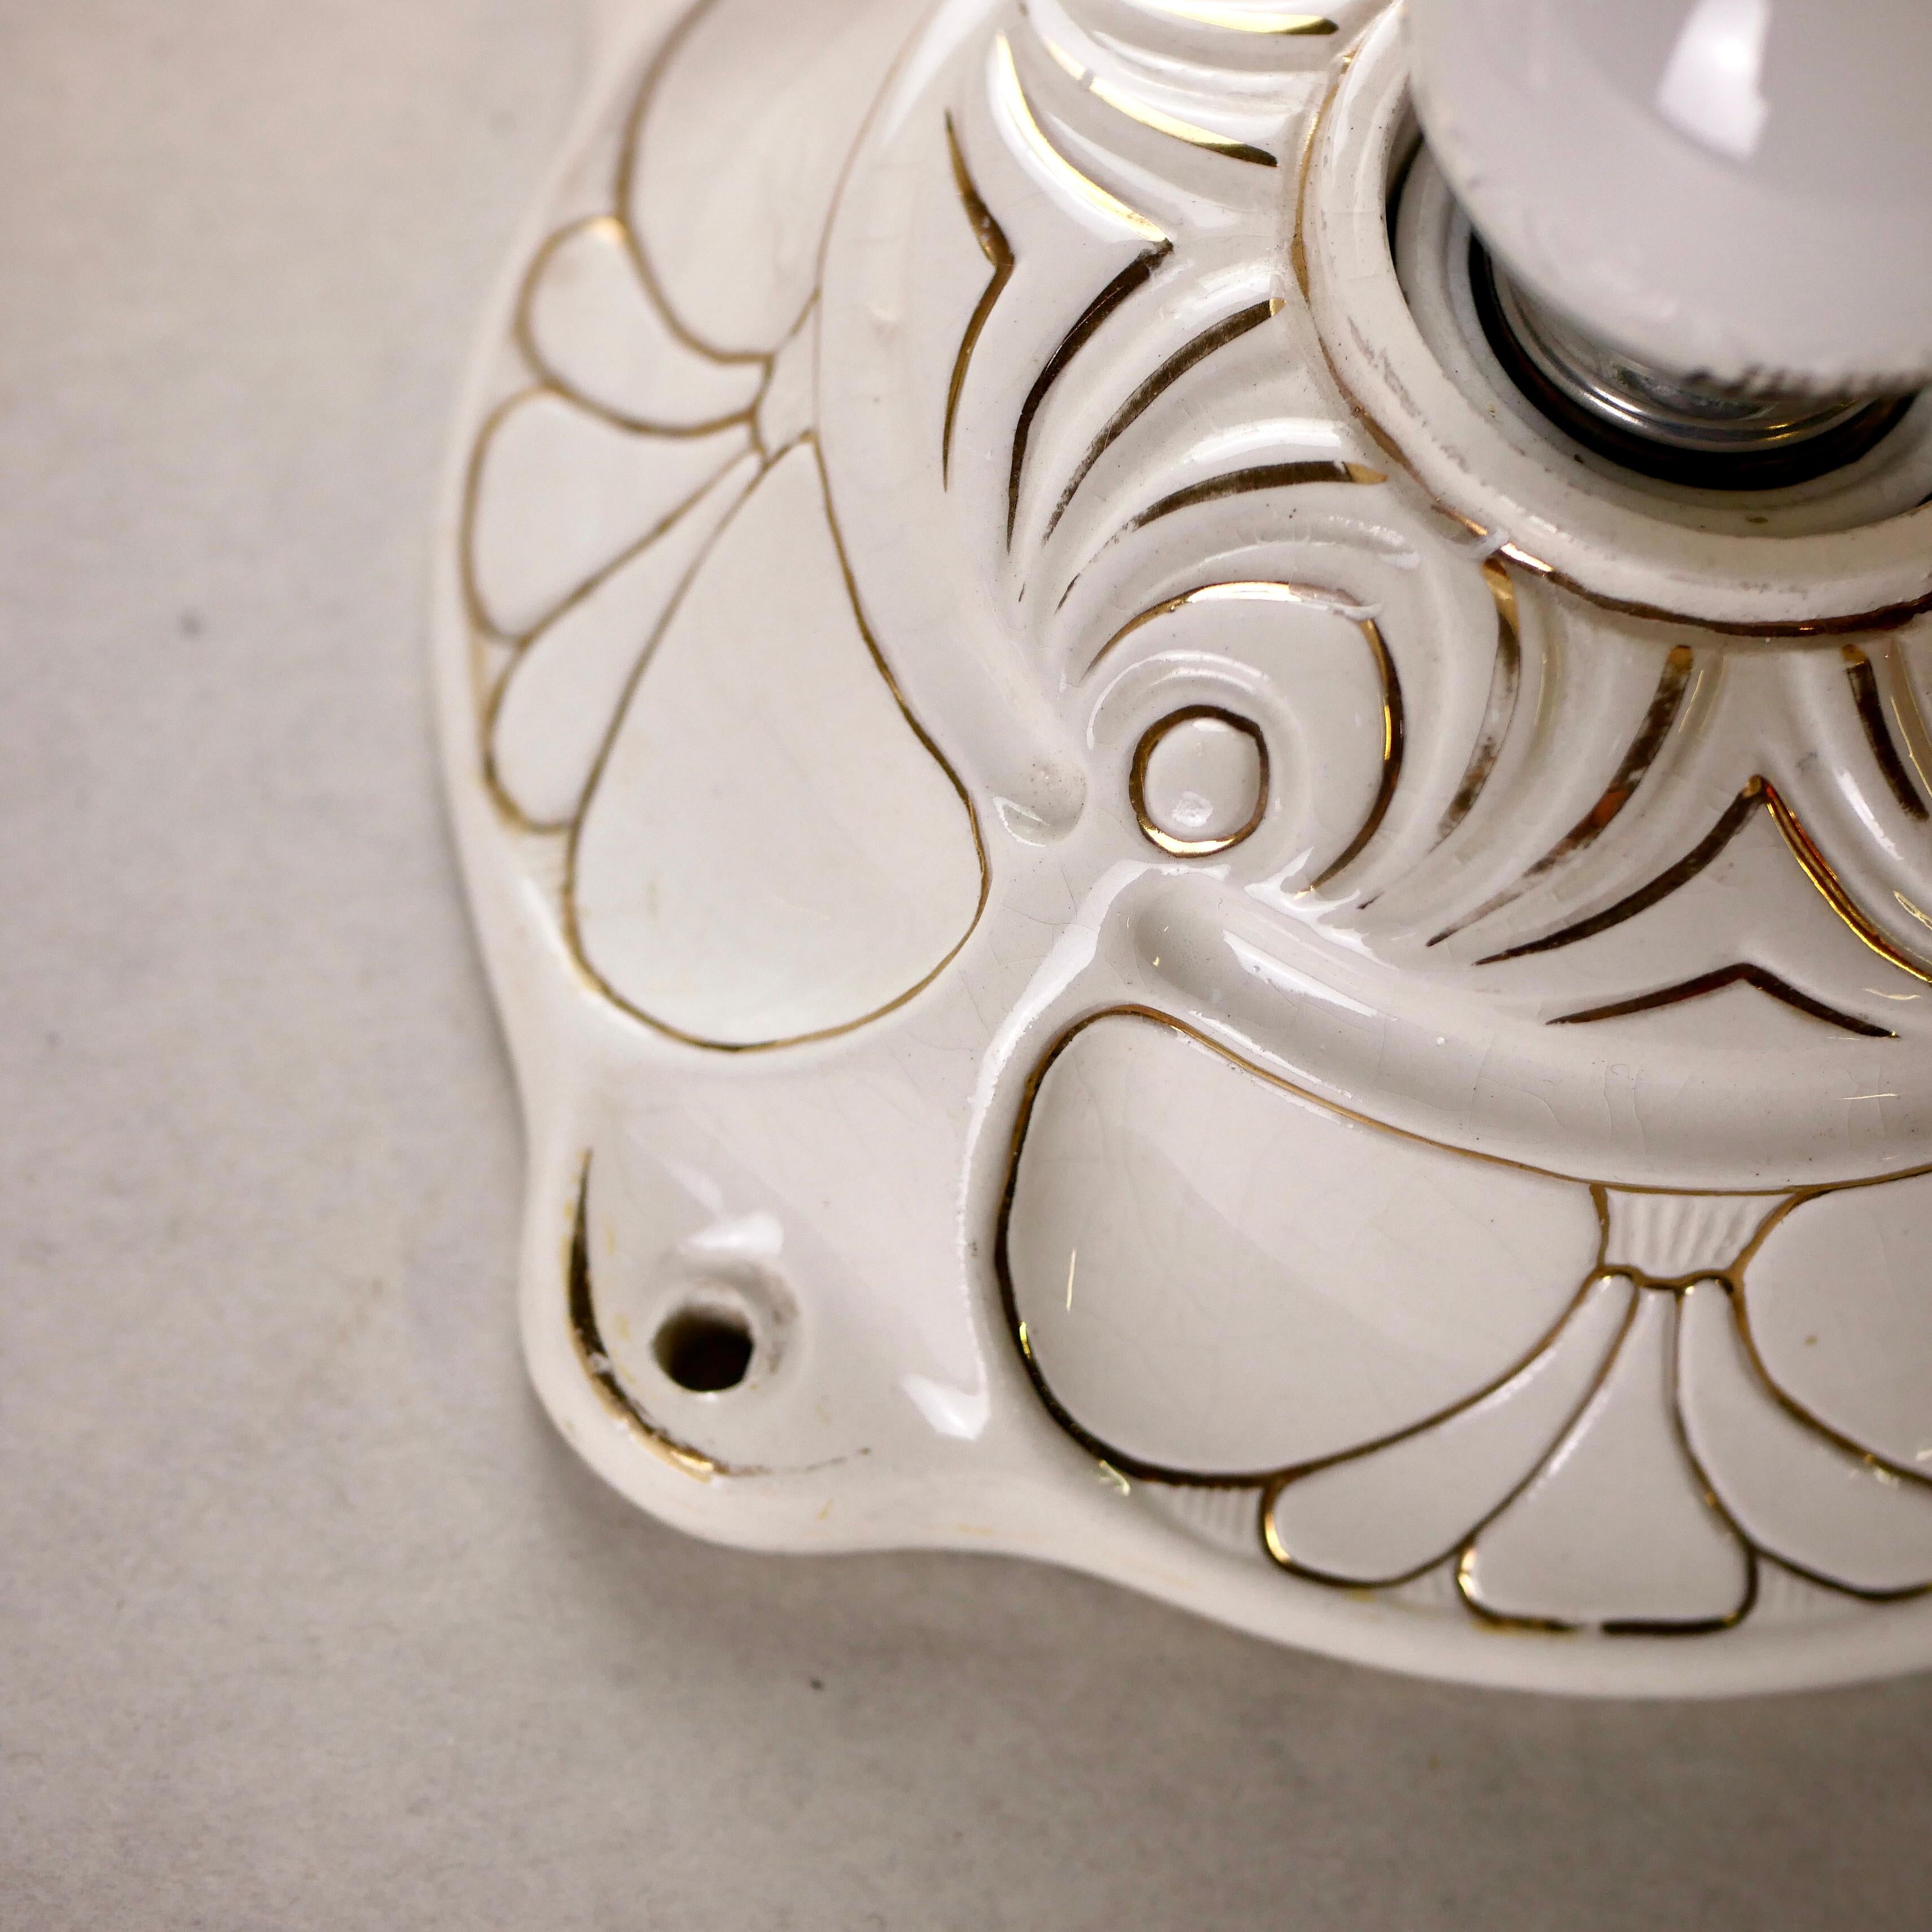 Mid-20th Century Porcelain Art Deco Style Wall Light from the Netherlands, 1940s